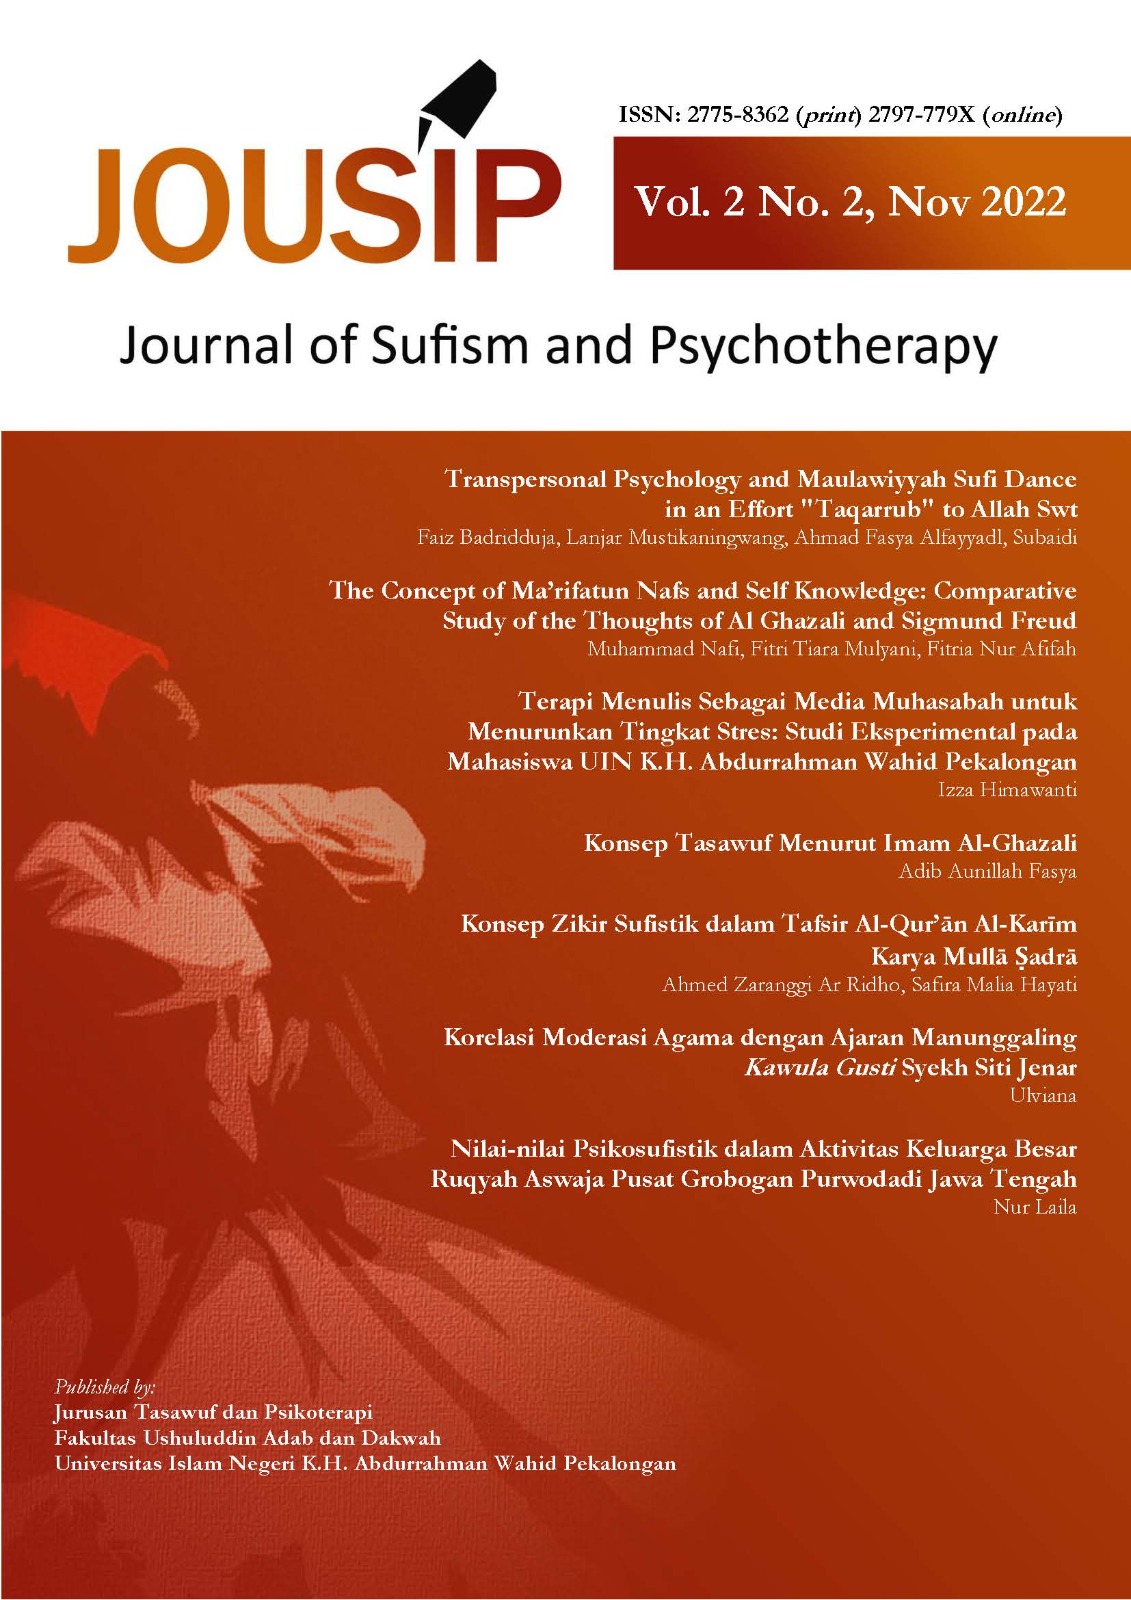 					View Vol. 2 No. 2 (2022): JOUSIP: Journal of Sufism and Psychotherapy, Vol. 2 No. 2, November 2022; Author Geographical: Indonesia.
				